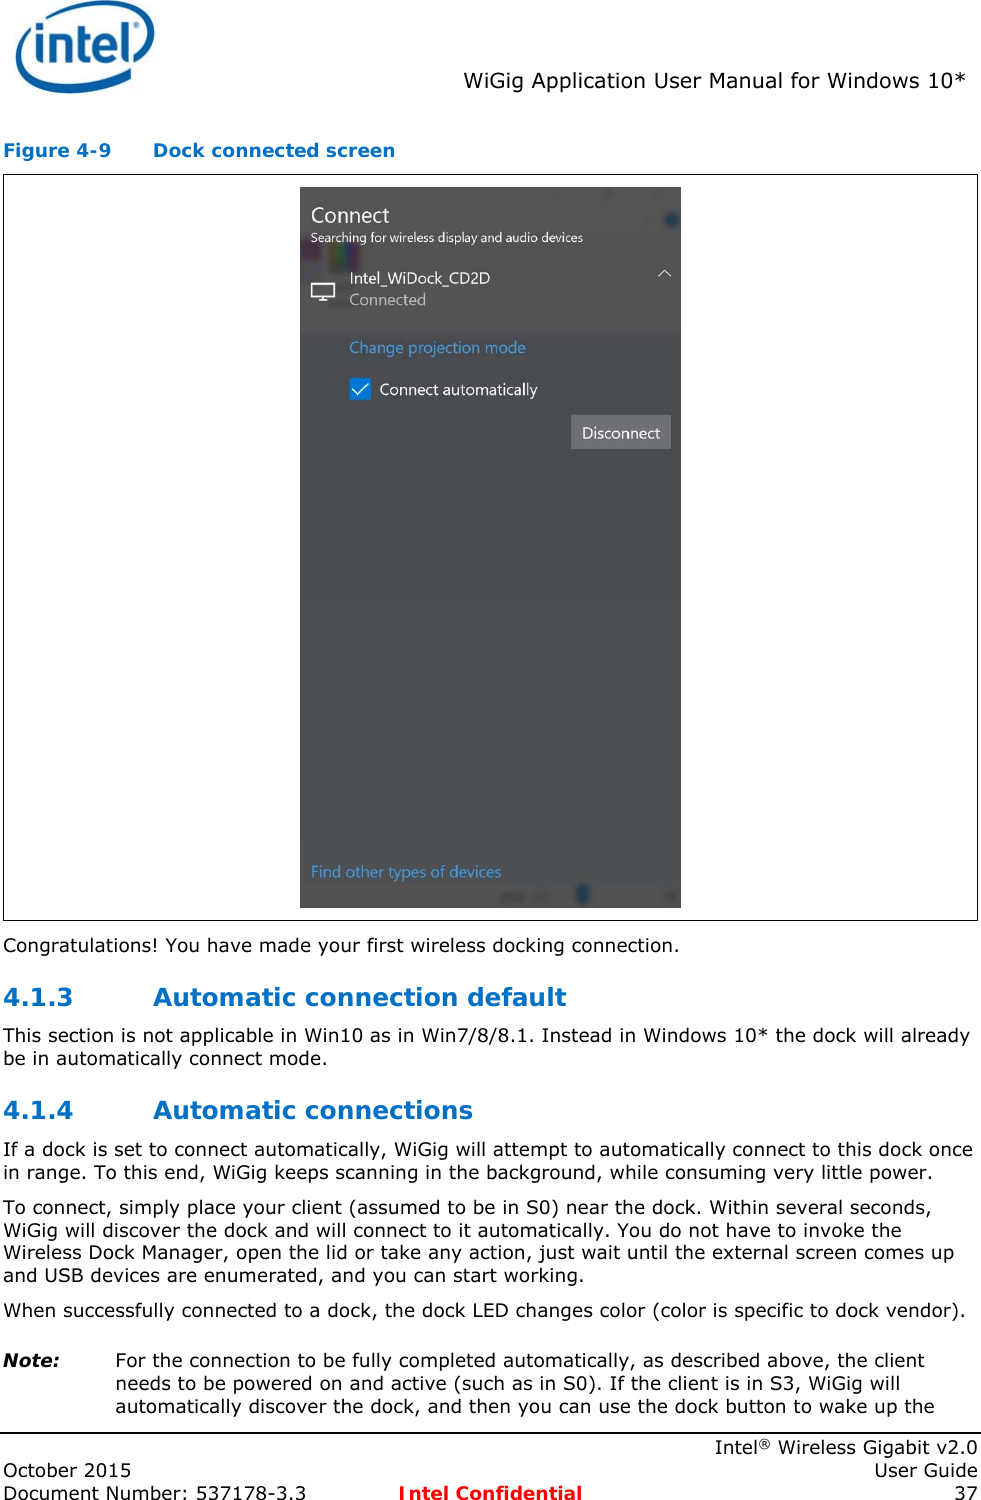  WiGig Application User Manual for Windows 10*    Intel® Wireless Gigabit v2.0 October 2015    User Guide Document Number: 537178-3.3  Intel Confidential 37 Figure 4-9  Dock connected screen  Congratulations! You have made your first wireless docking connection. 4.1.3 Automatic connection default This section is not applicable in Win10 as in Win7/8/8.1. Instead in Windows 10* the dock will already be in automatically connect mode. 4.1.4 Automatic connections If a dock is set to connect automatically, WiGig will attempt to automatically connect to this dock once in range. To this end, WiGig keeps scanning in the background, while consuming very little power. To connect, simply place your client (assumed to be in S0) near the dock. Within several seconds, WiGig will discover the dock and will connect to it automatically. You do not have to invoke the Wireless Dock Manager, open the lid or take any action, just wait until the external screen comes up and USB devices are enumerated, and you can start working. When successfully connected to a dock, the dock LED changes color (color is specific to dock vendor). Note: For the connection to be fully completed automatically, as described above, the client needs to be powered on and active (such as in S0). If the client is in S3, WiGig will automatically discover the dock, and then you can use the dock button to wake up the 